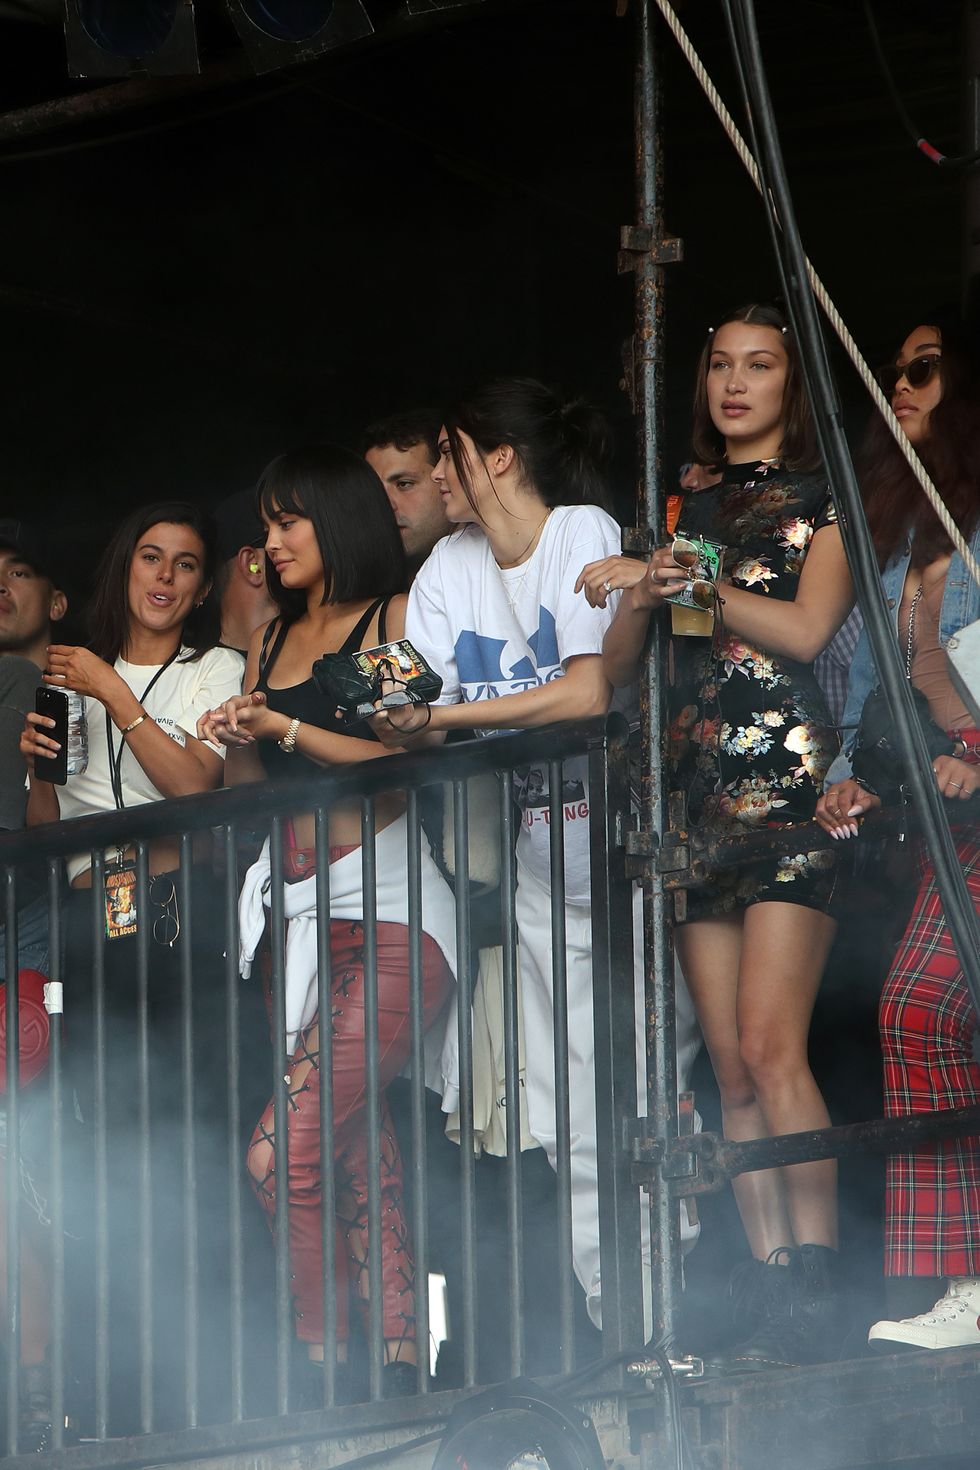 Kylie Jenner, Kendall Jenner and Bella Hadid at Wireless Festival 2017